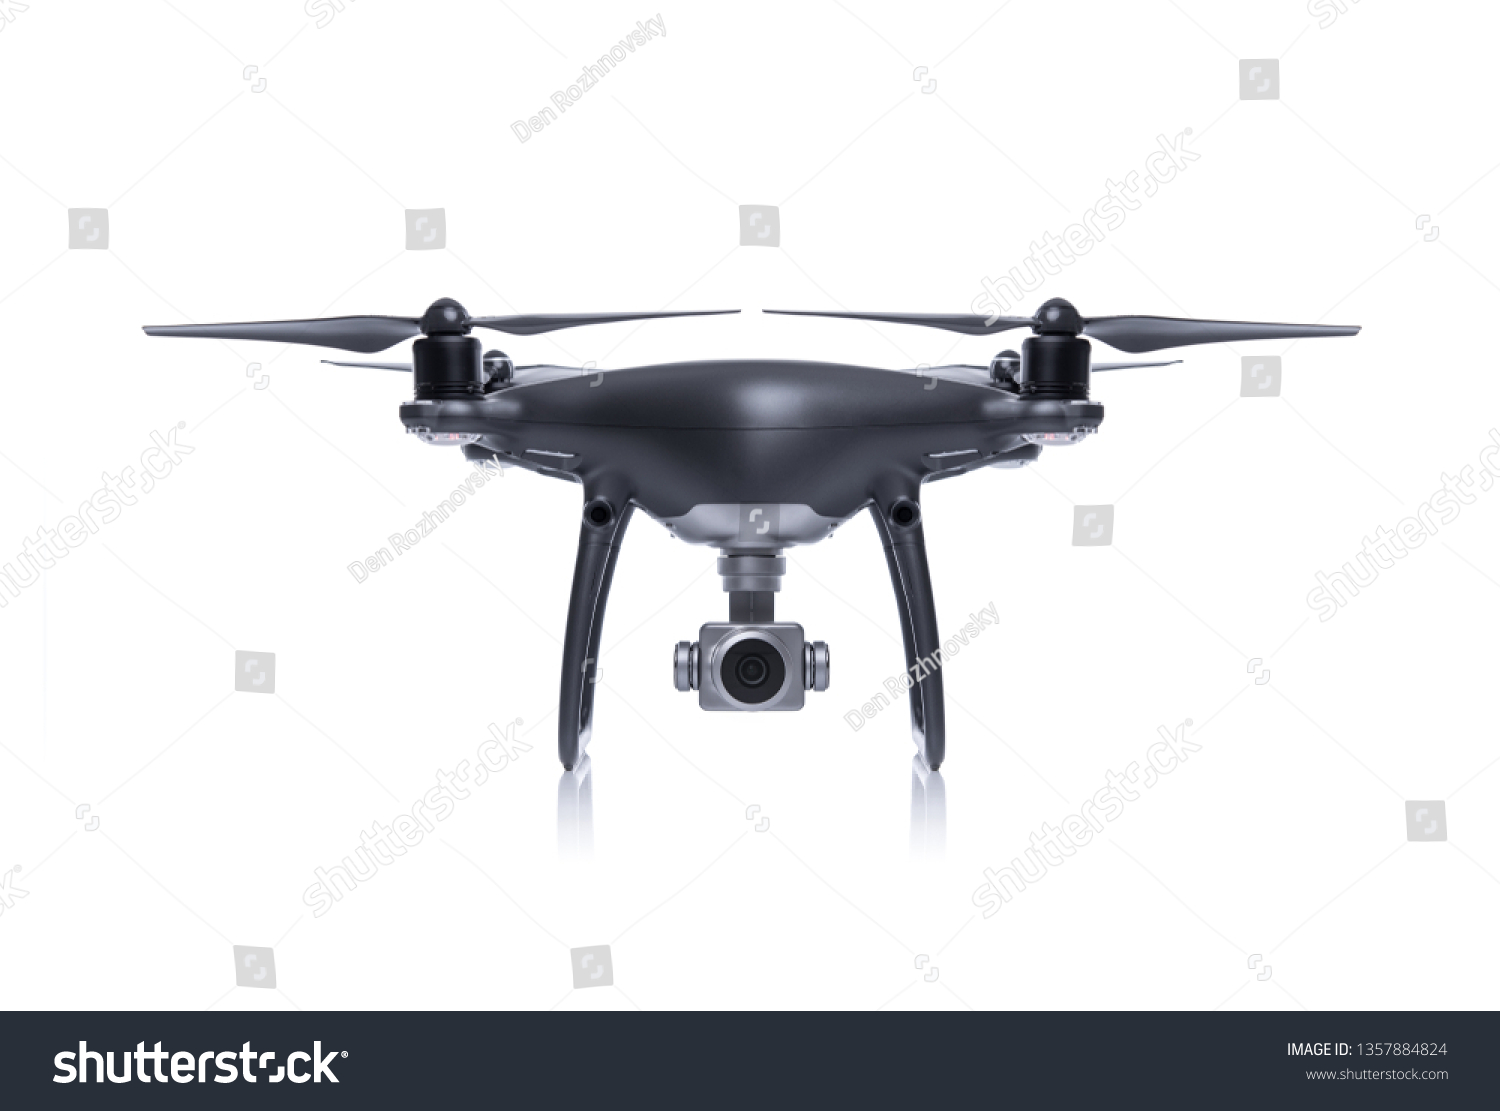 Dark drone isolated on a white background. #1357884824